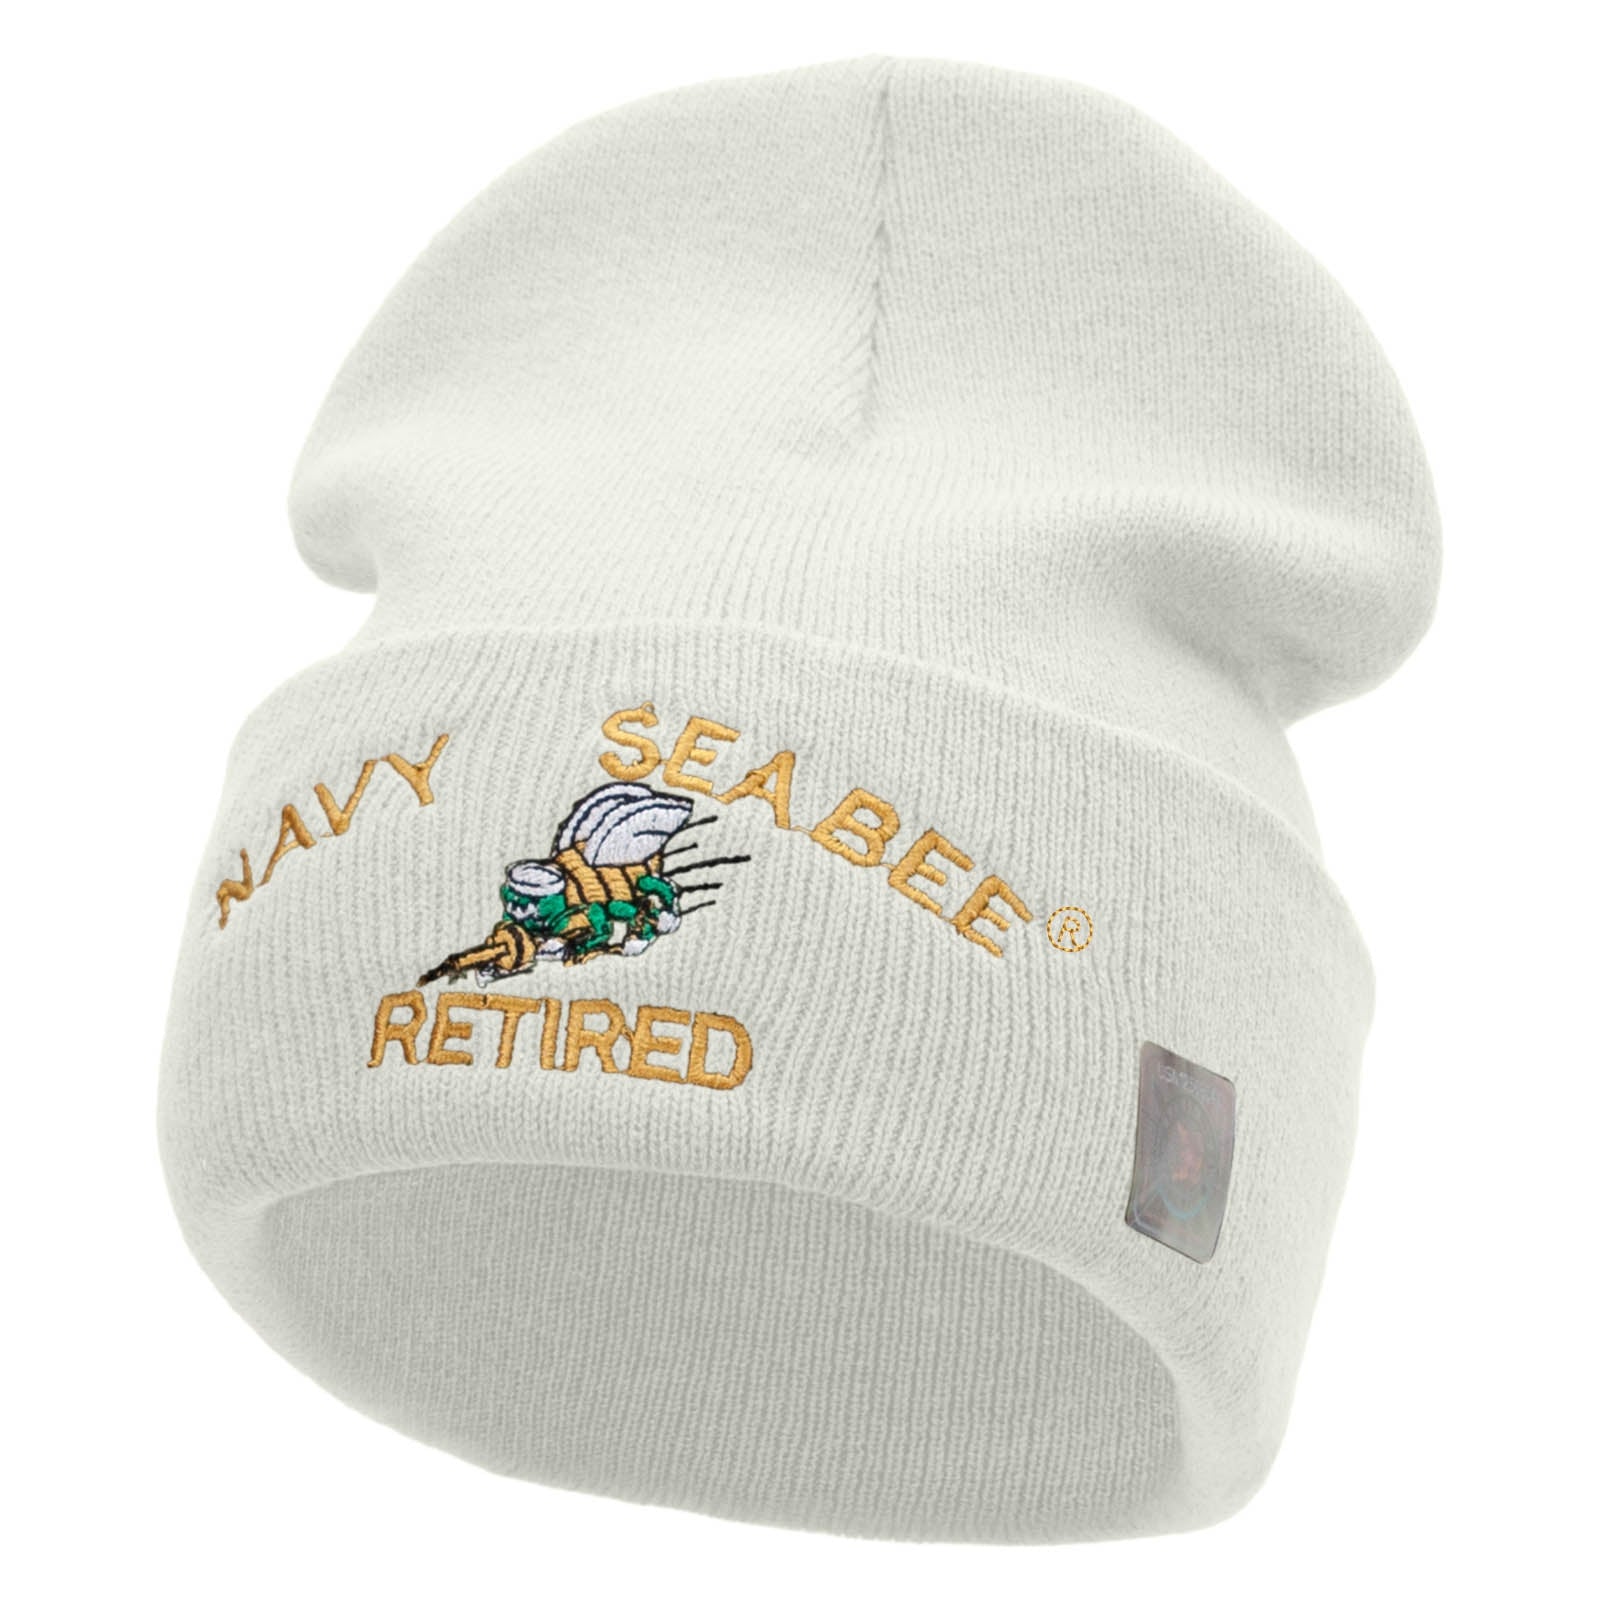 Licensed Navy Seabee Retired Logo Embroidered Long Beanie Made in USA - White OSFM